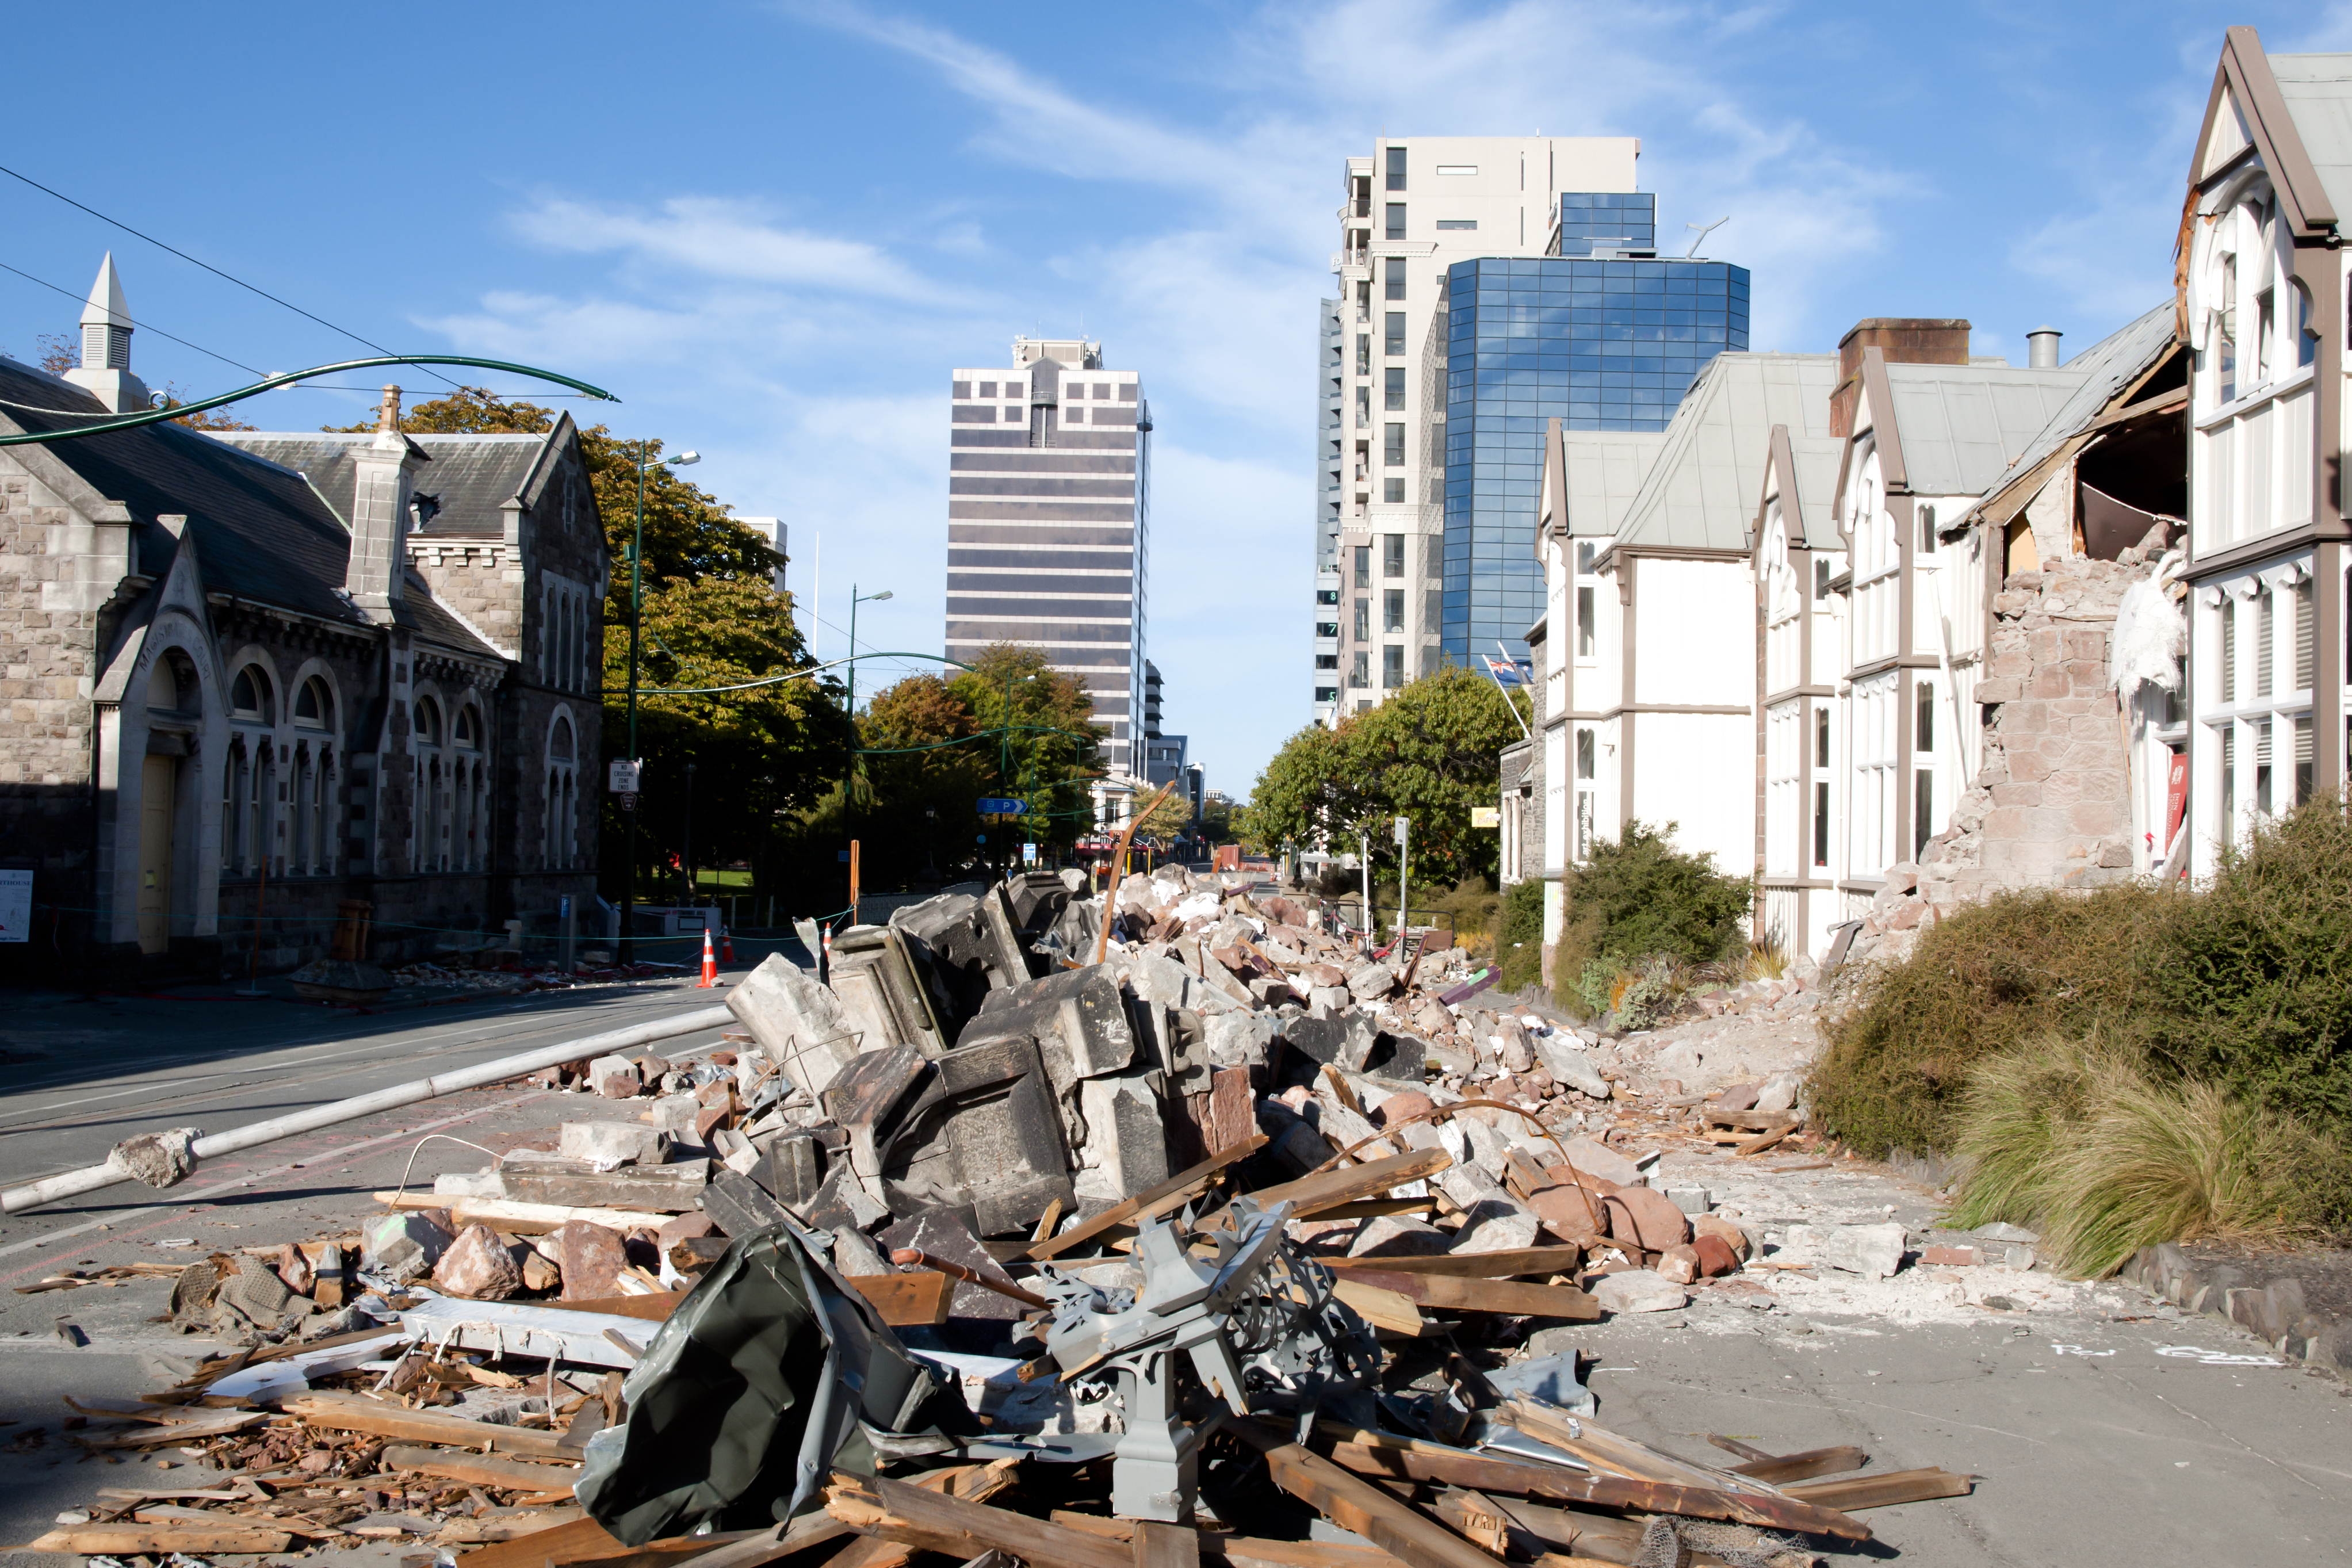 Pile of rubble in the street, houses with the front falling down due to earthquake. Office towers in the background.